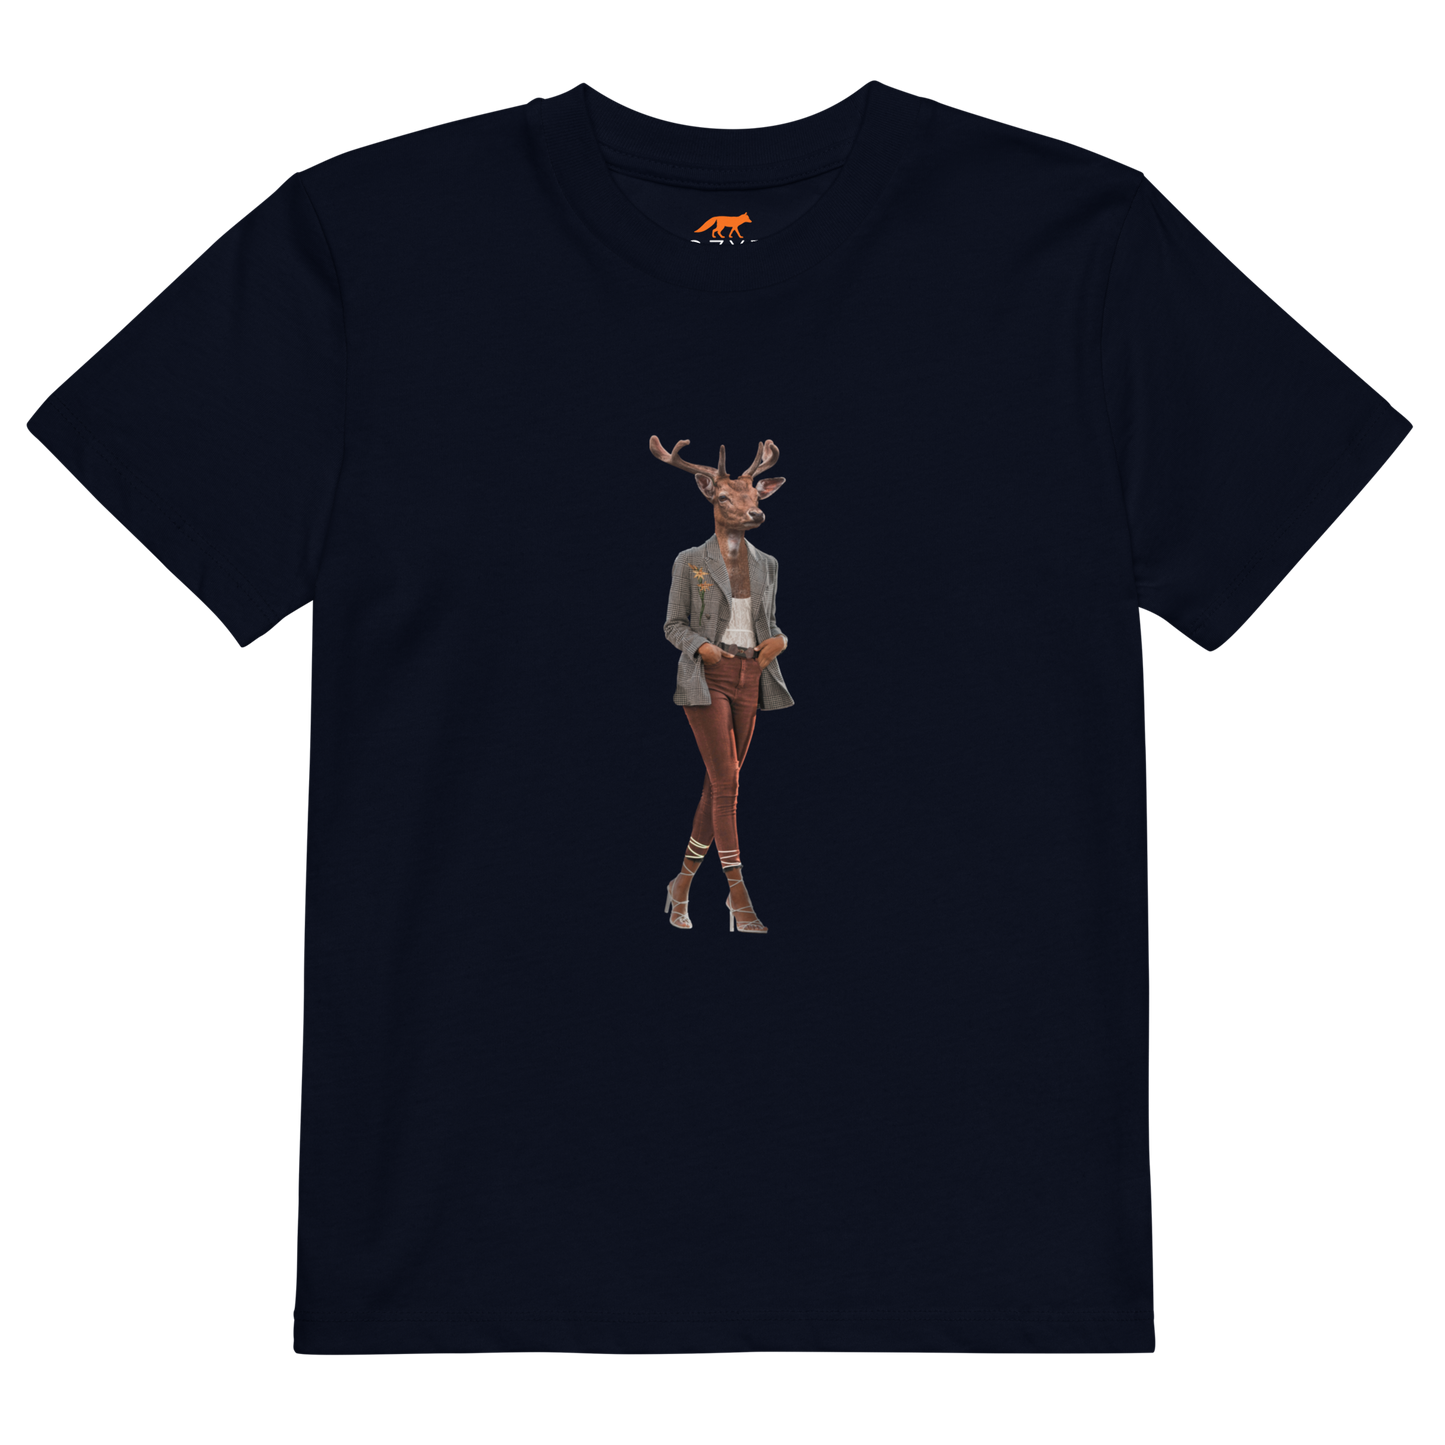 French Navy Anthropomorphic Deer Organic Cotton Kids T-Shirt featuring an Anthropomorphic Deer graphic on the chest - Kids' Graphic Tees - Funny Animal T-Shirts - Boozy Fox